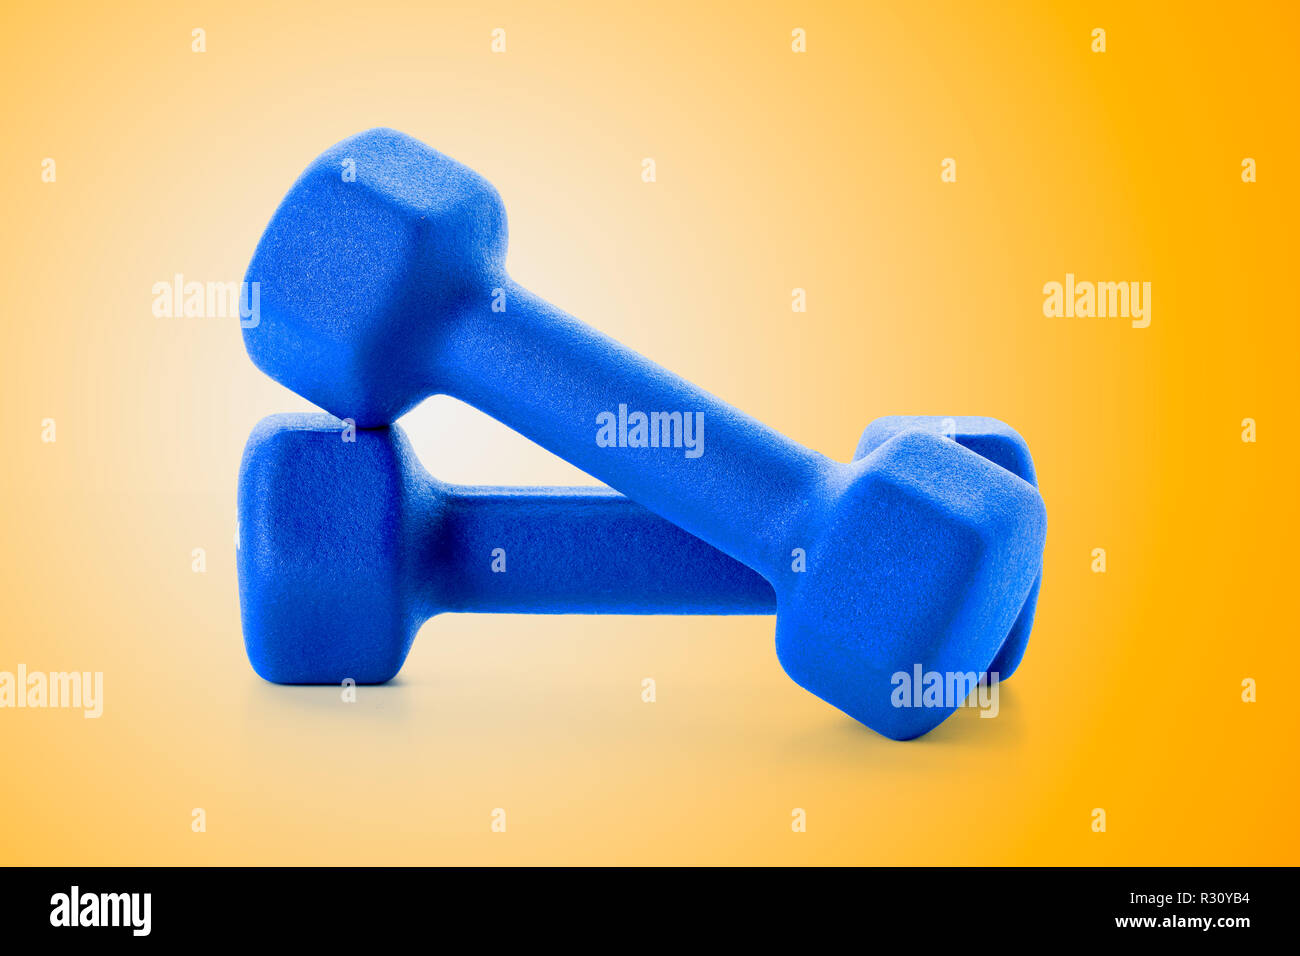 Two small blue dumbbells on bright orange background, close-up and front-view Stock Photo